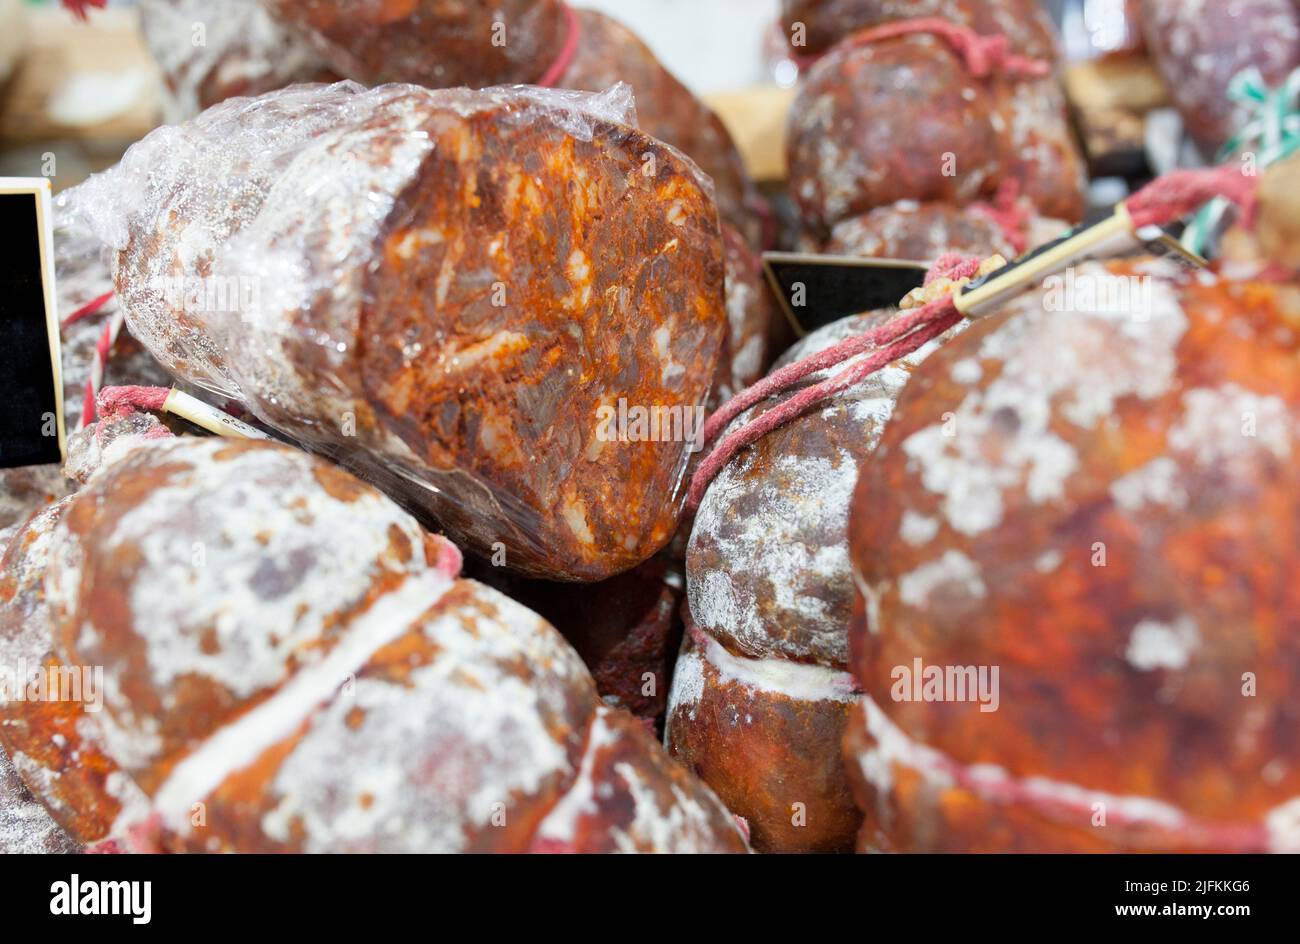 Iberian morcon displayed at street market stall. Selective focus. Stock Photo